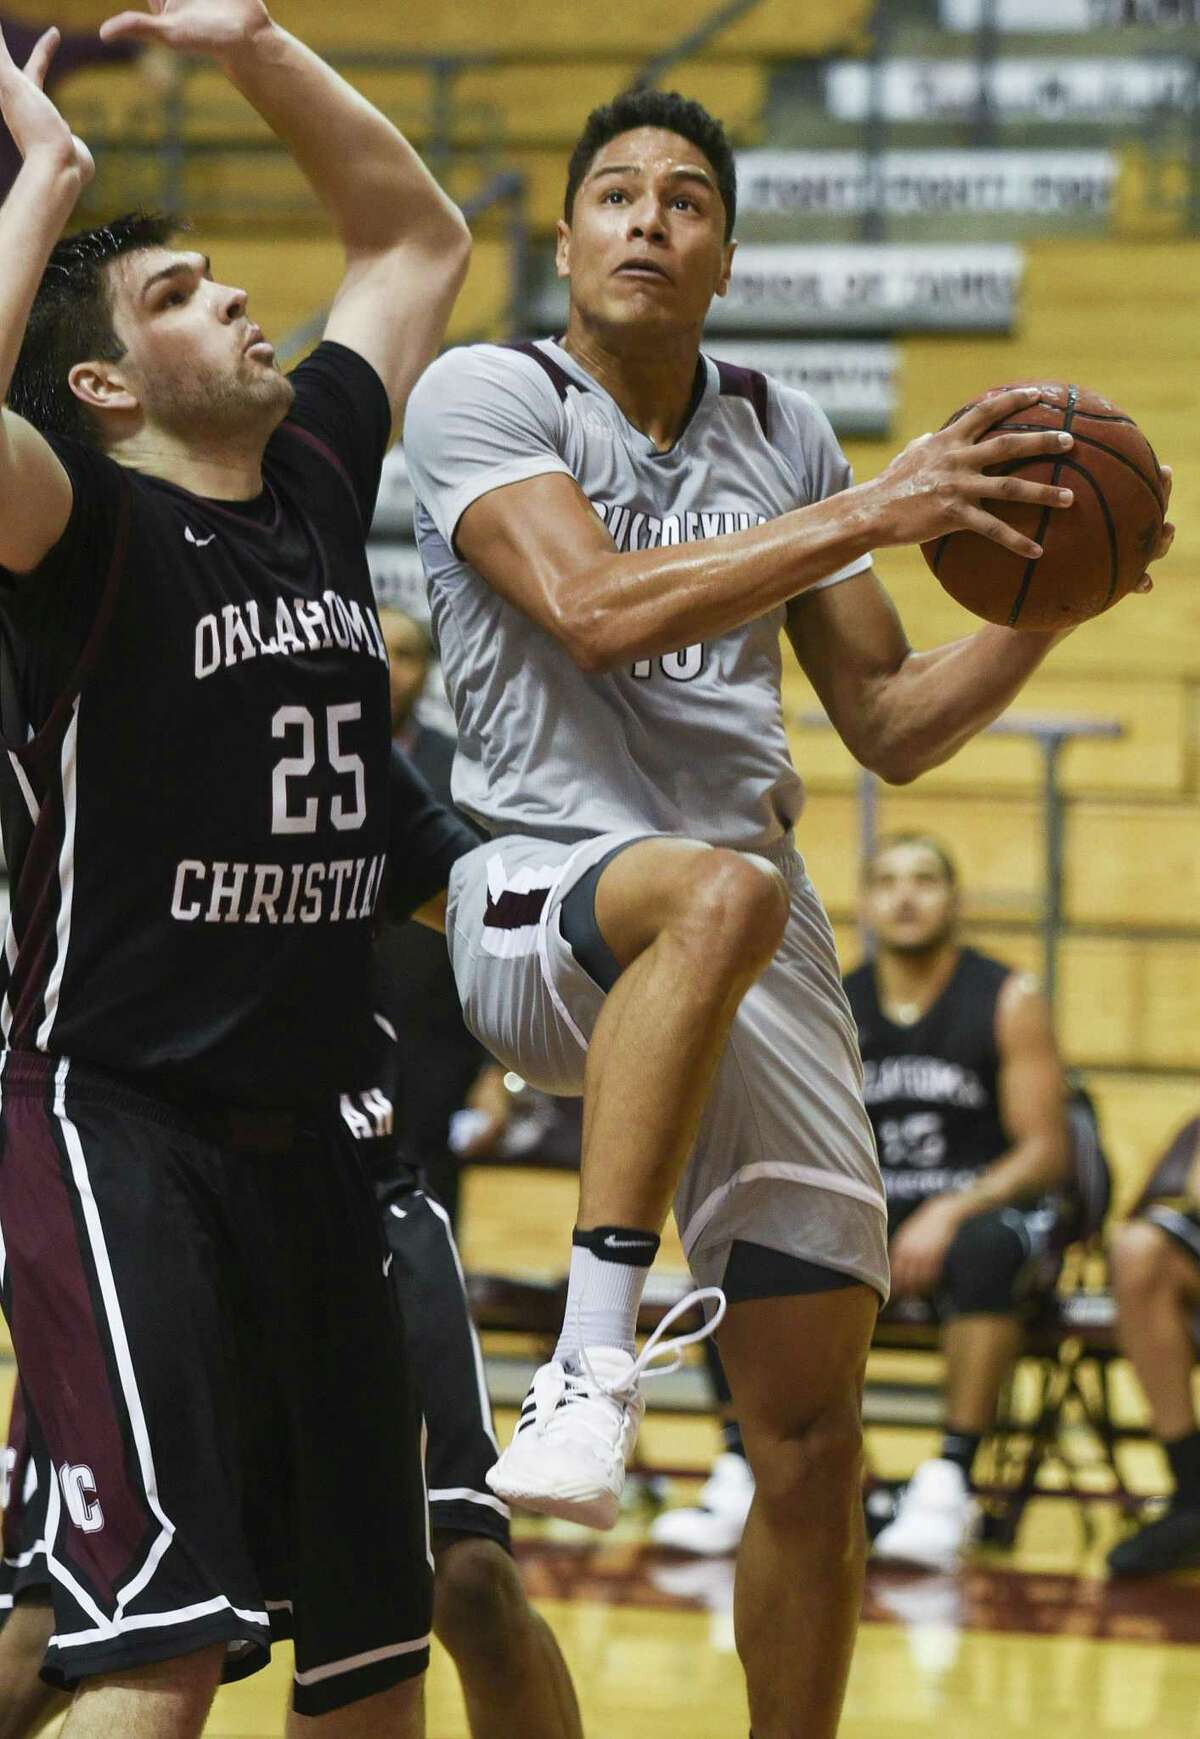 TAMIU guard Xabier Gomez scored 20 points but the Dustdevils lost 89-64 to Oklahoma Christian in their worst defensive outing of the year on Thursday night.